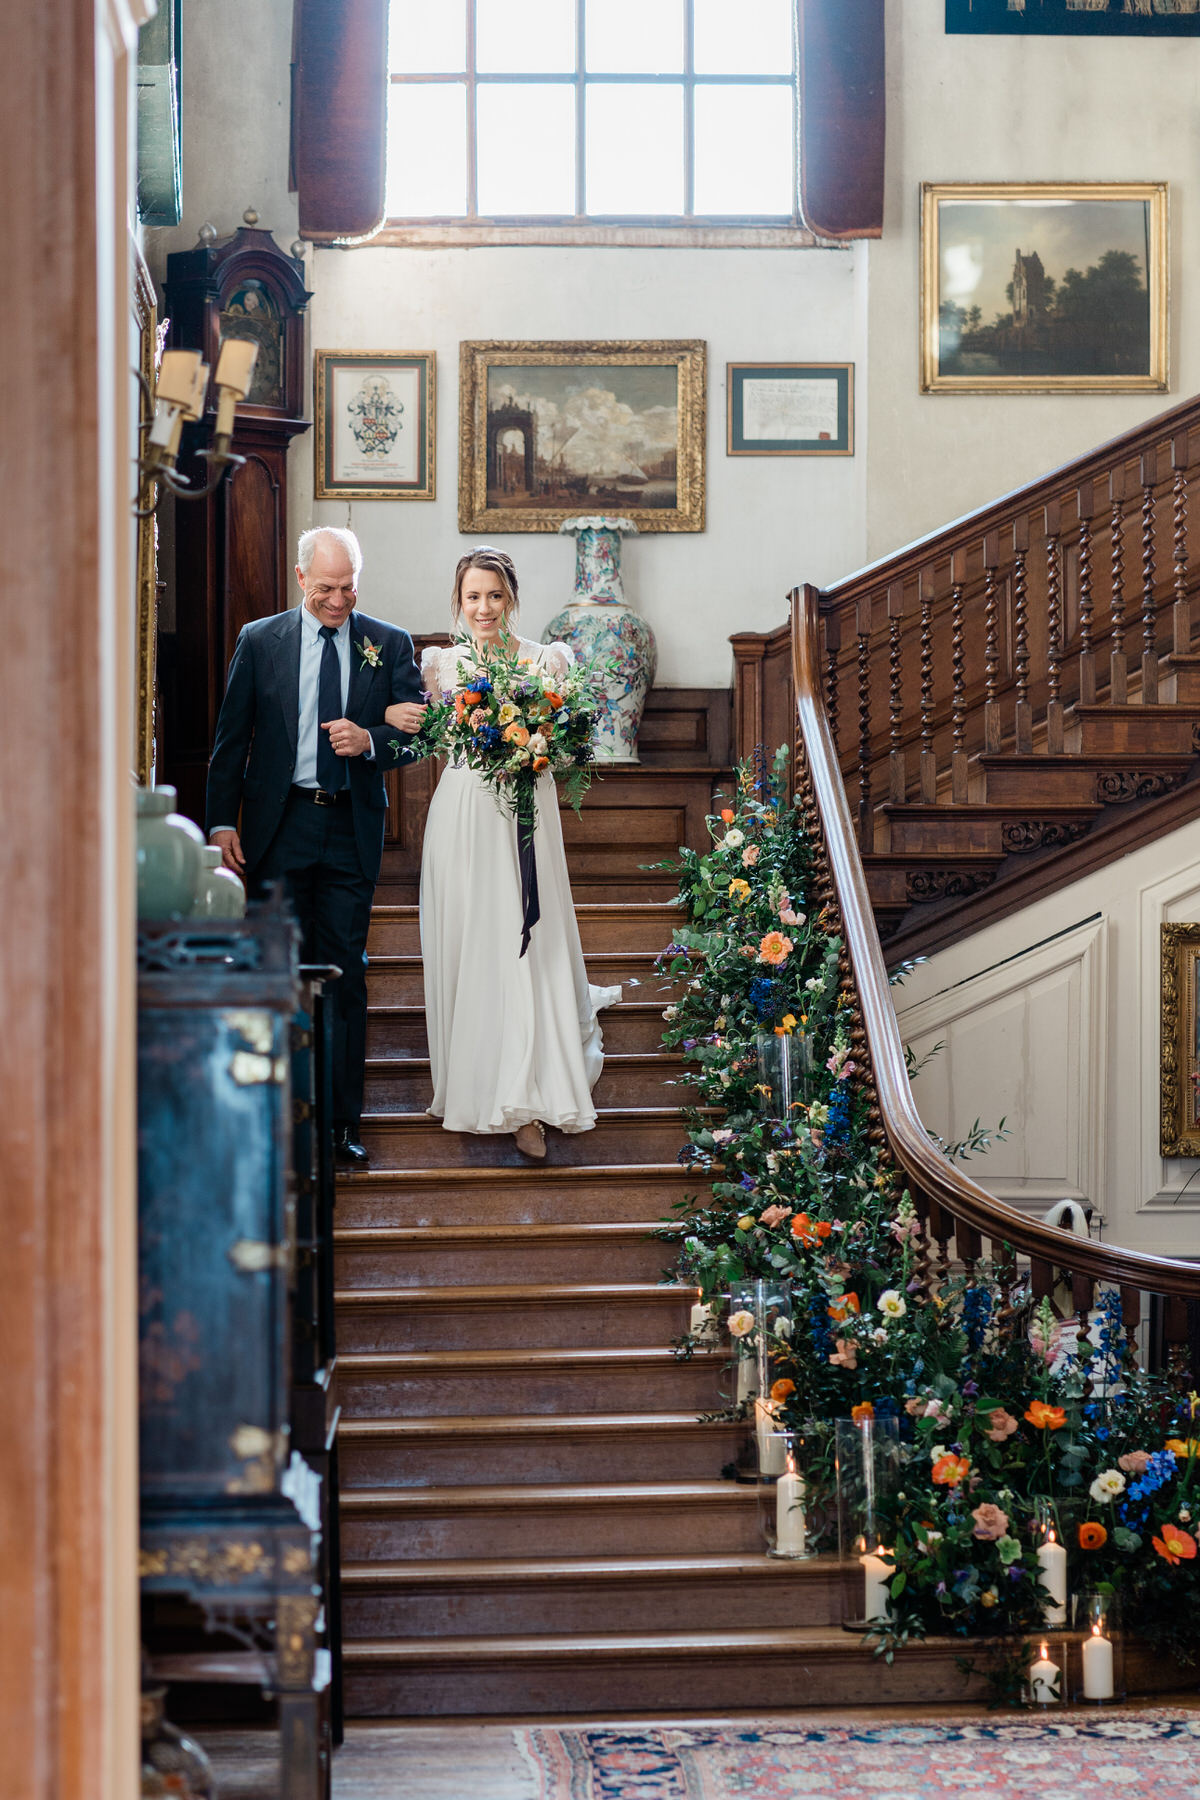 Cara walking down the aisle/stairs at Glemham all but fore the ceremony.